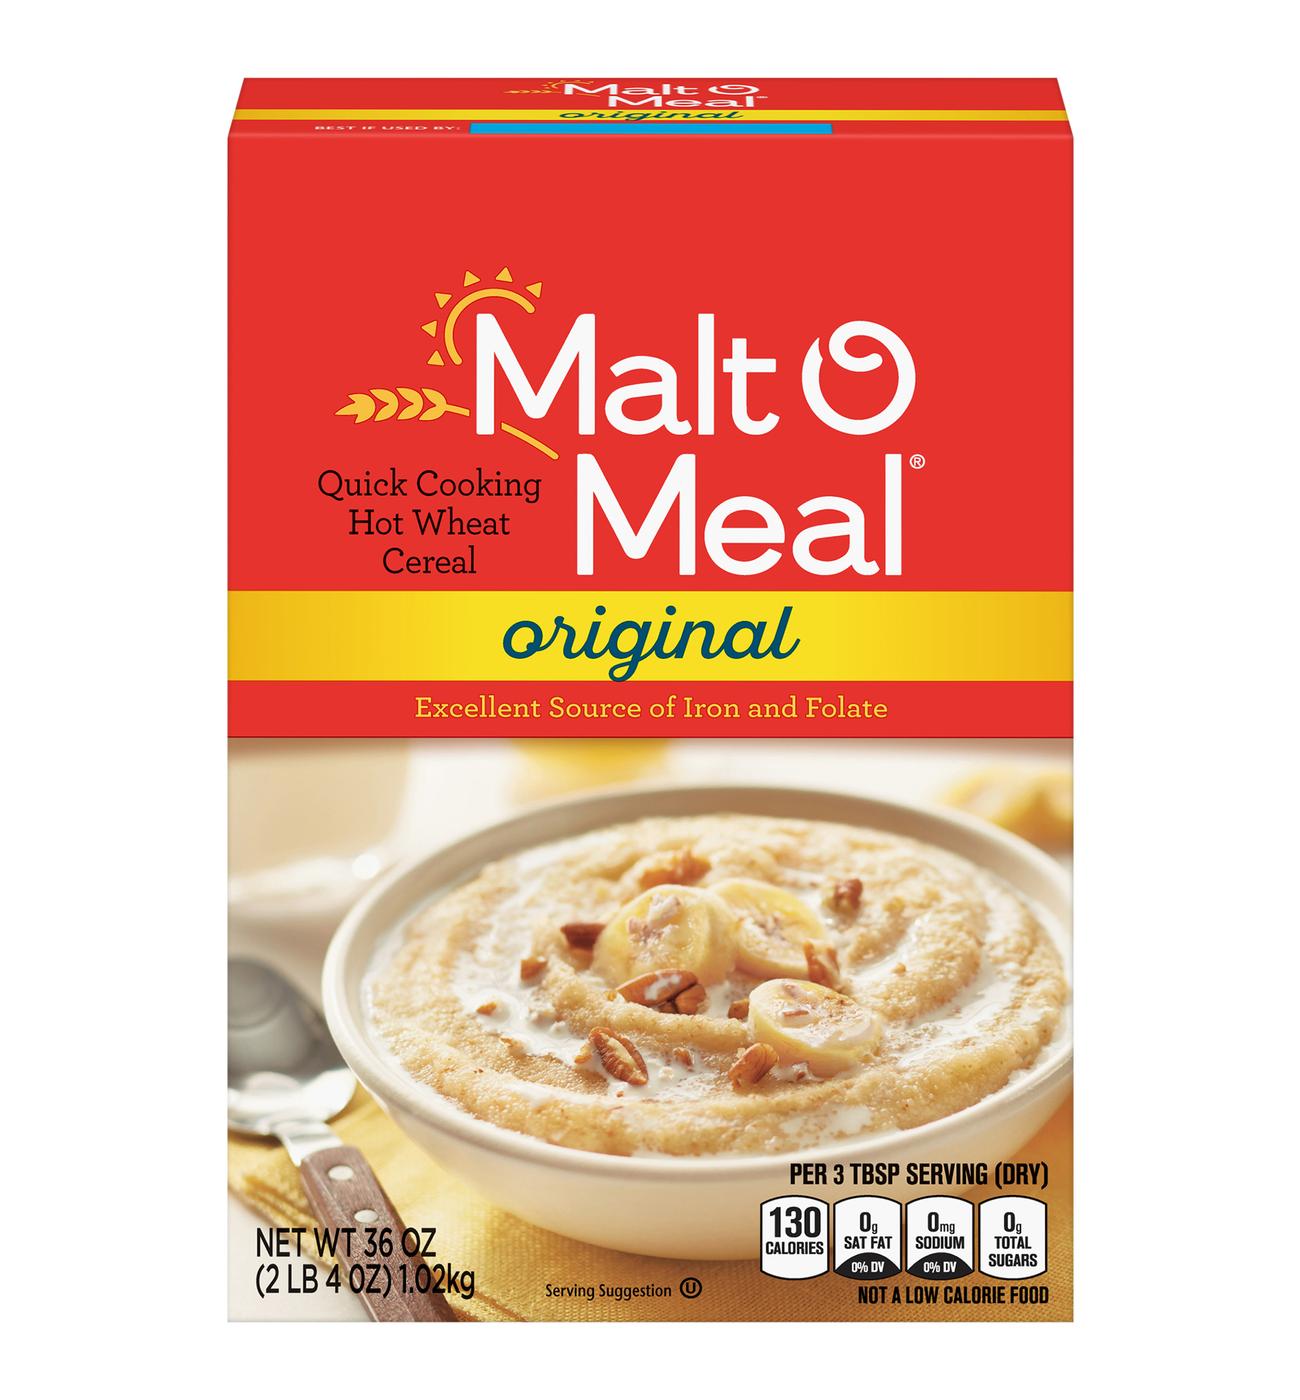 Malt-O-Meal Quick Cooking Original Hot Wheat Cereal; image 2 of 2